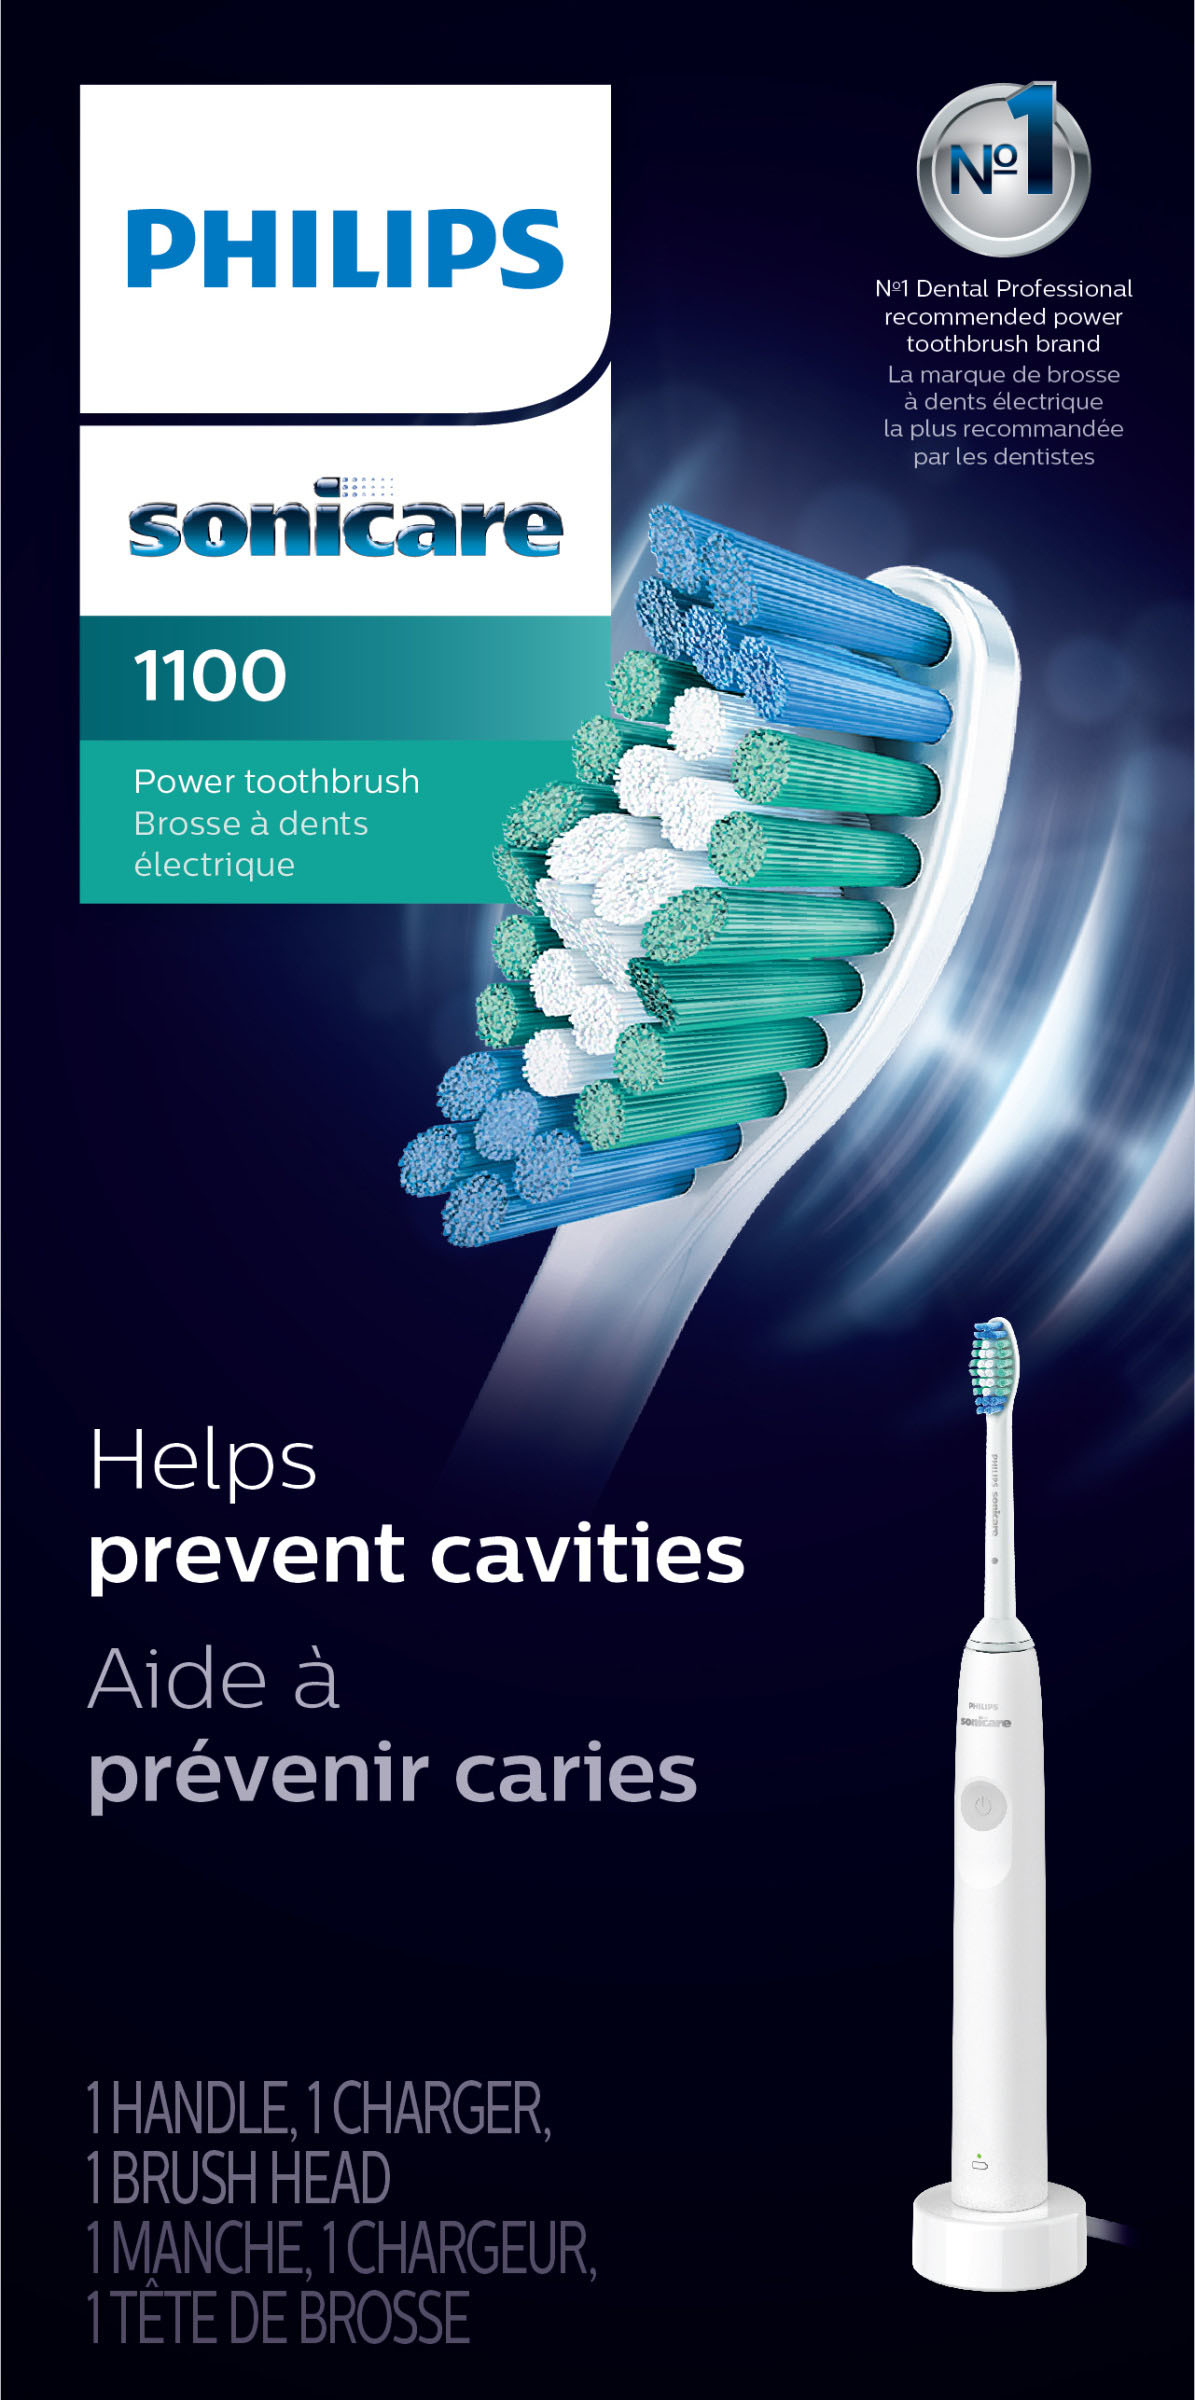 Toothbrush Electric Toothbrush, Rechargeable HX3641/02 Grey Buy Sonicare - Philips Power Best White 1100